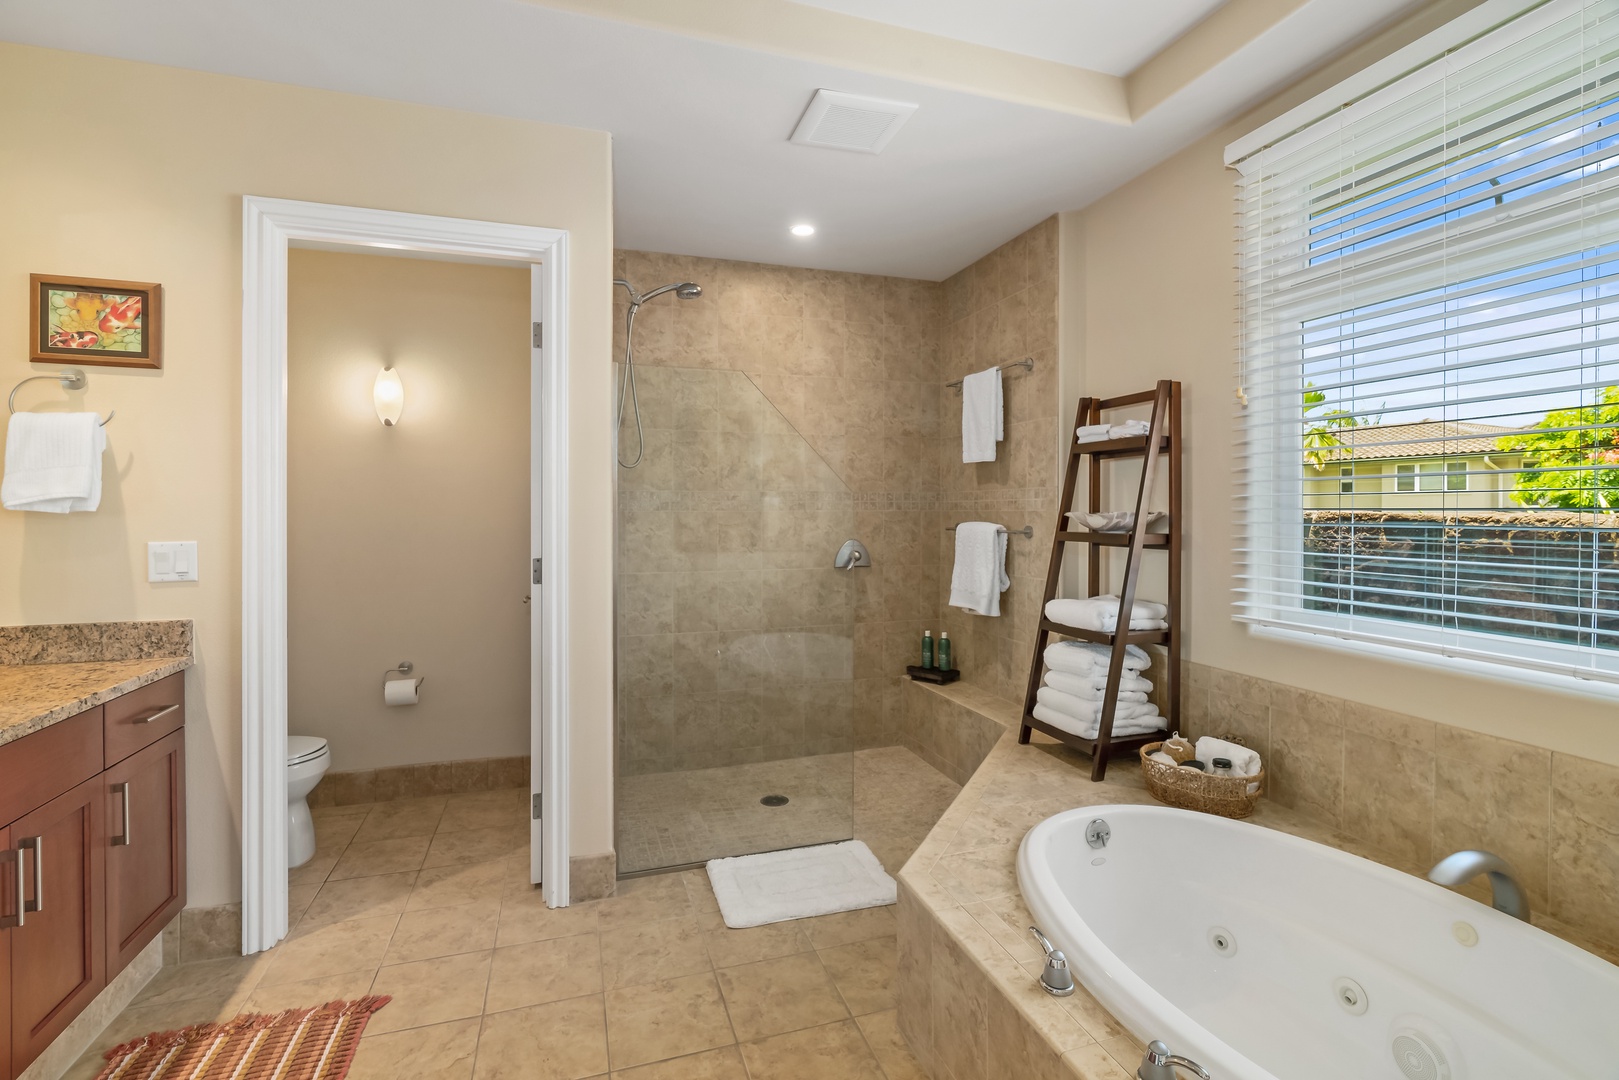 Princeville Vacation Rentals, Noelani Kai - The ensuite bath tempts with an oversized soaking tub, promising indulgent moments of relaxation.